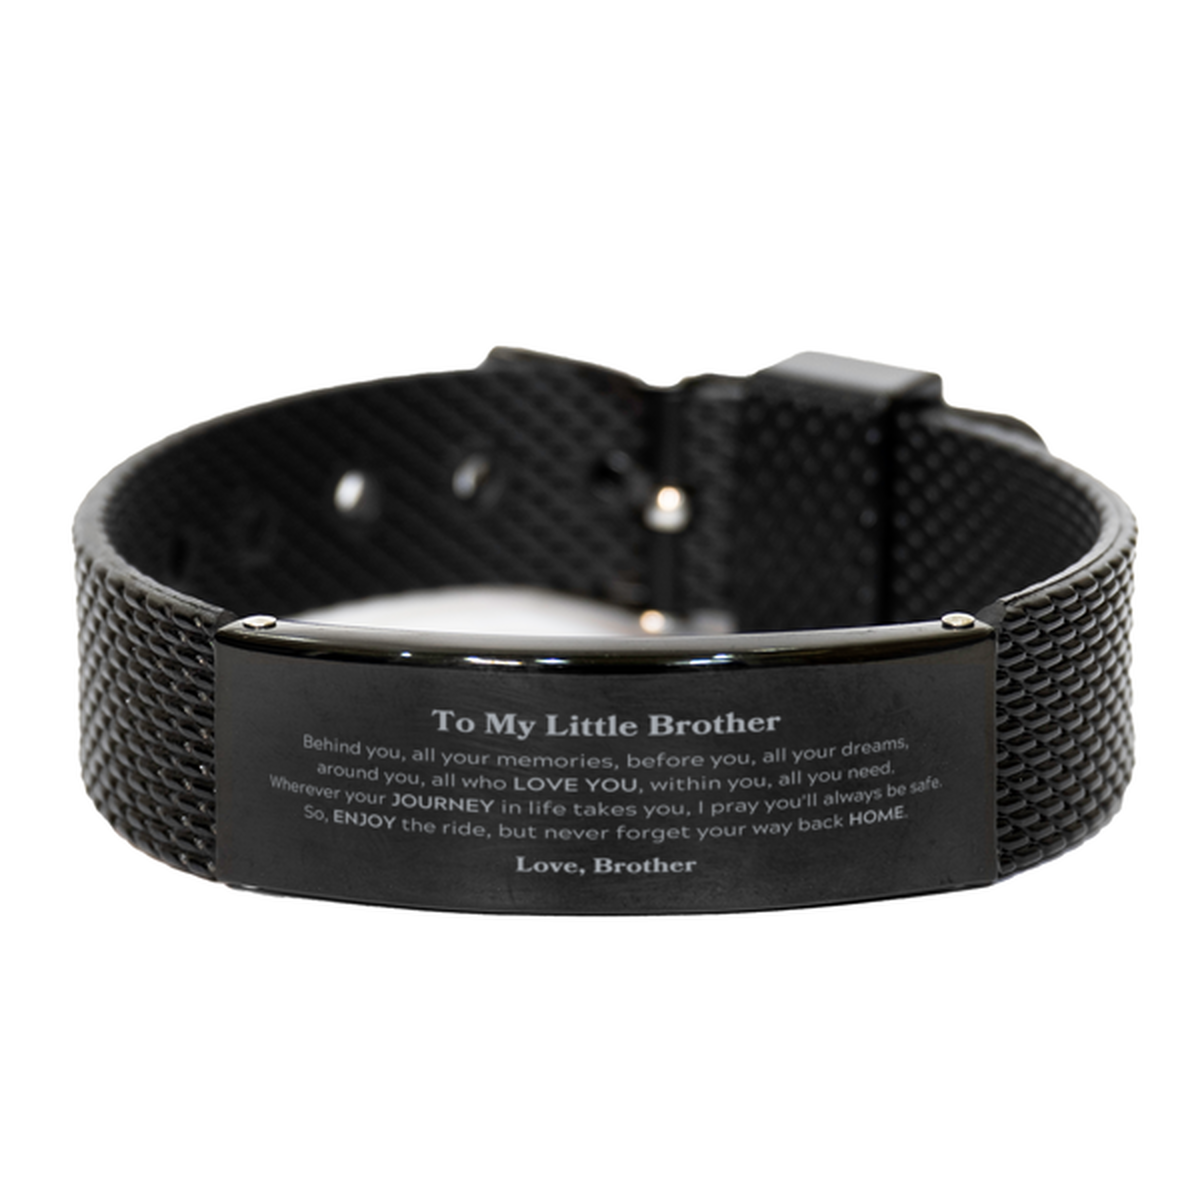 To My Little Brother Graduation Gifts from Brother, Little Brother Black Shark Mesh Bracelet Christmas Birthday Gifts for Little Brother Behind you, all your memories, before you, all your dreams. Love, Brother